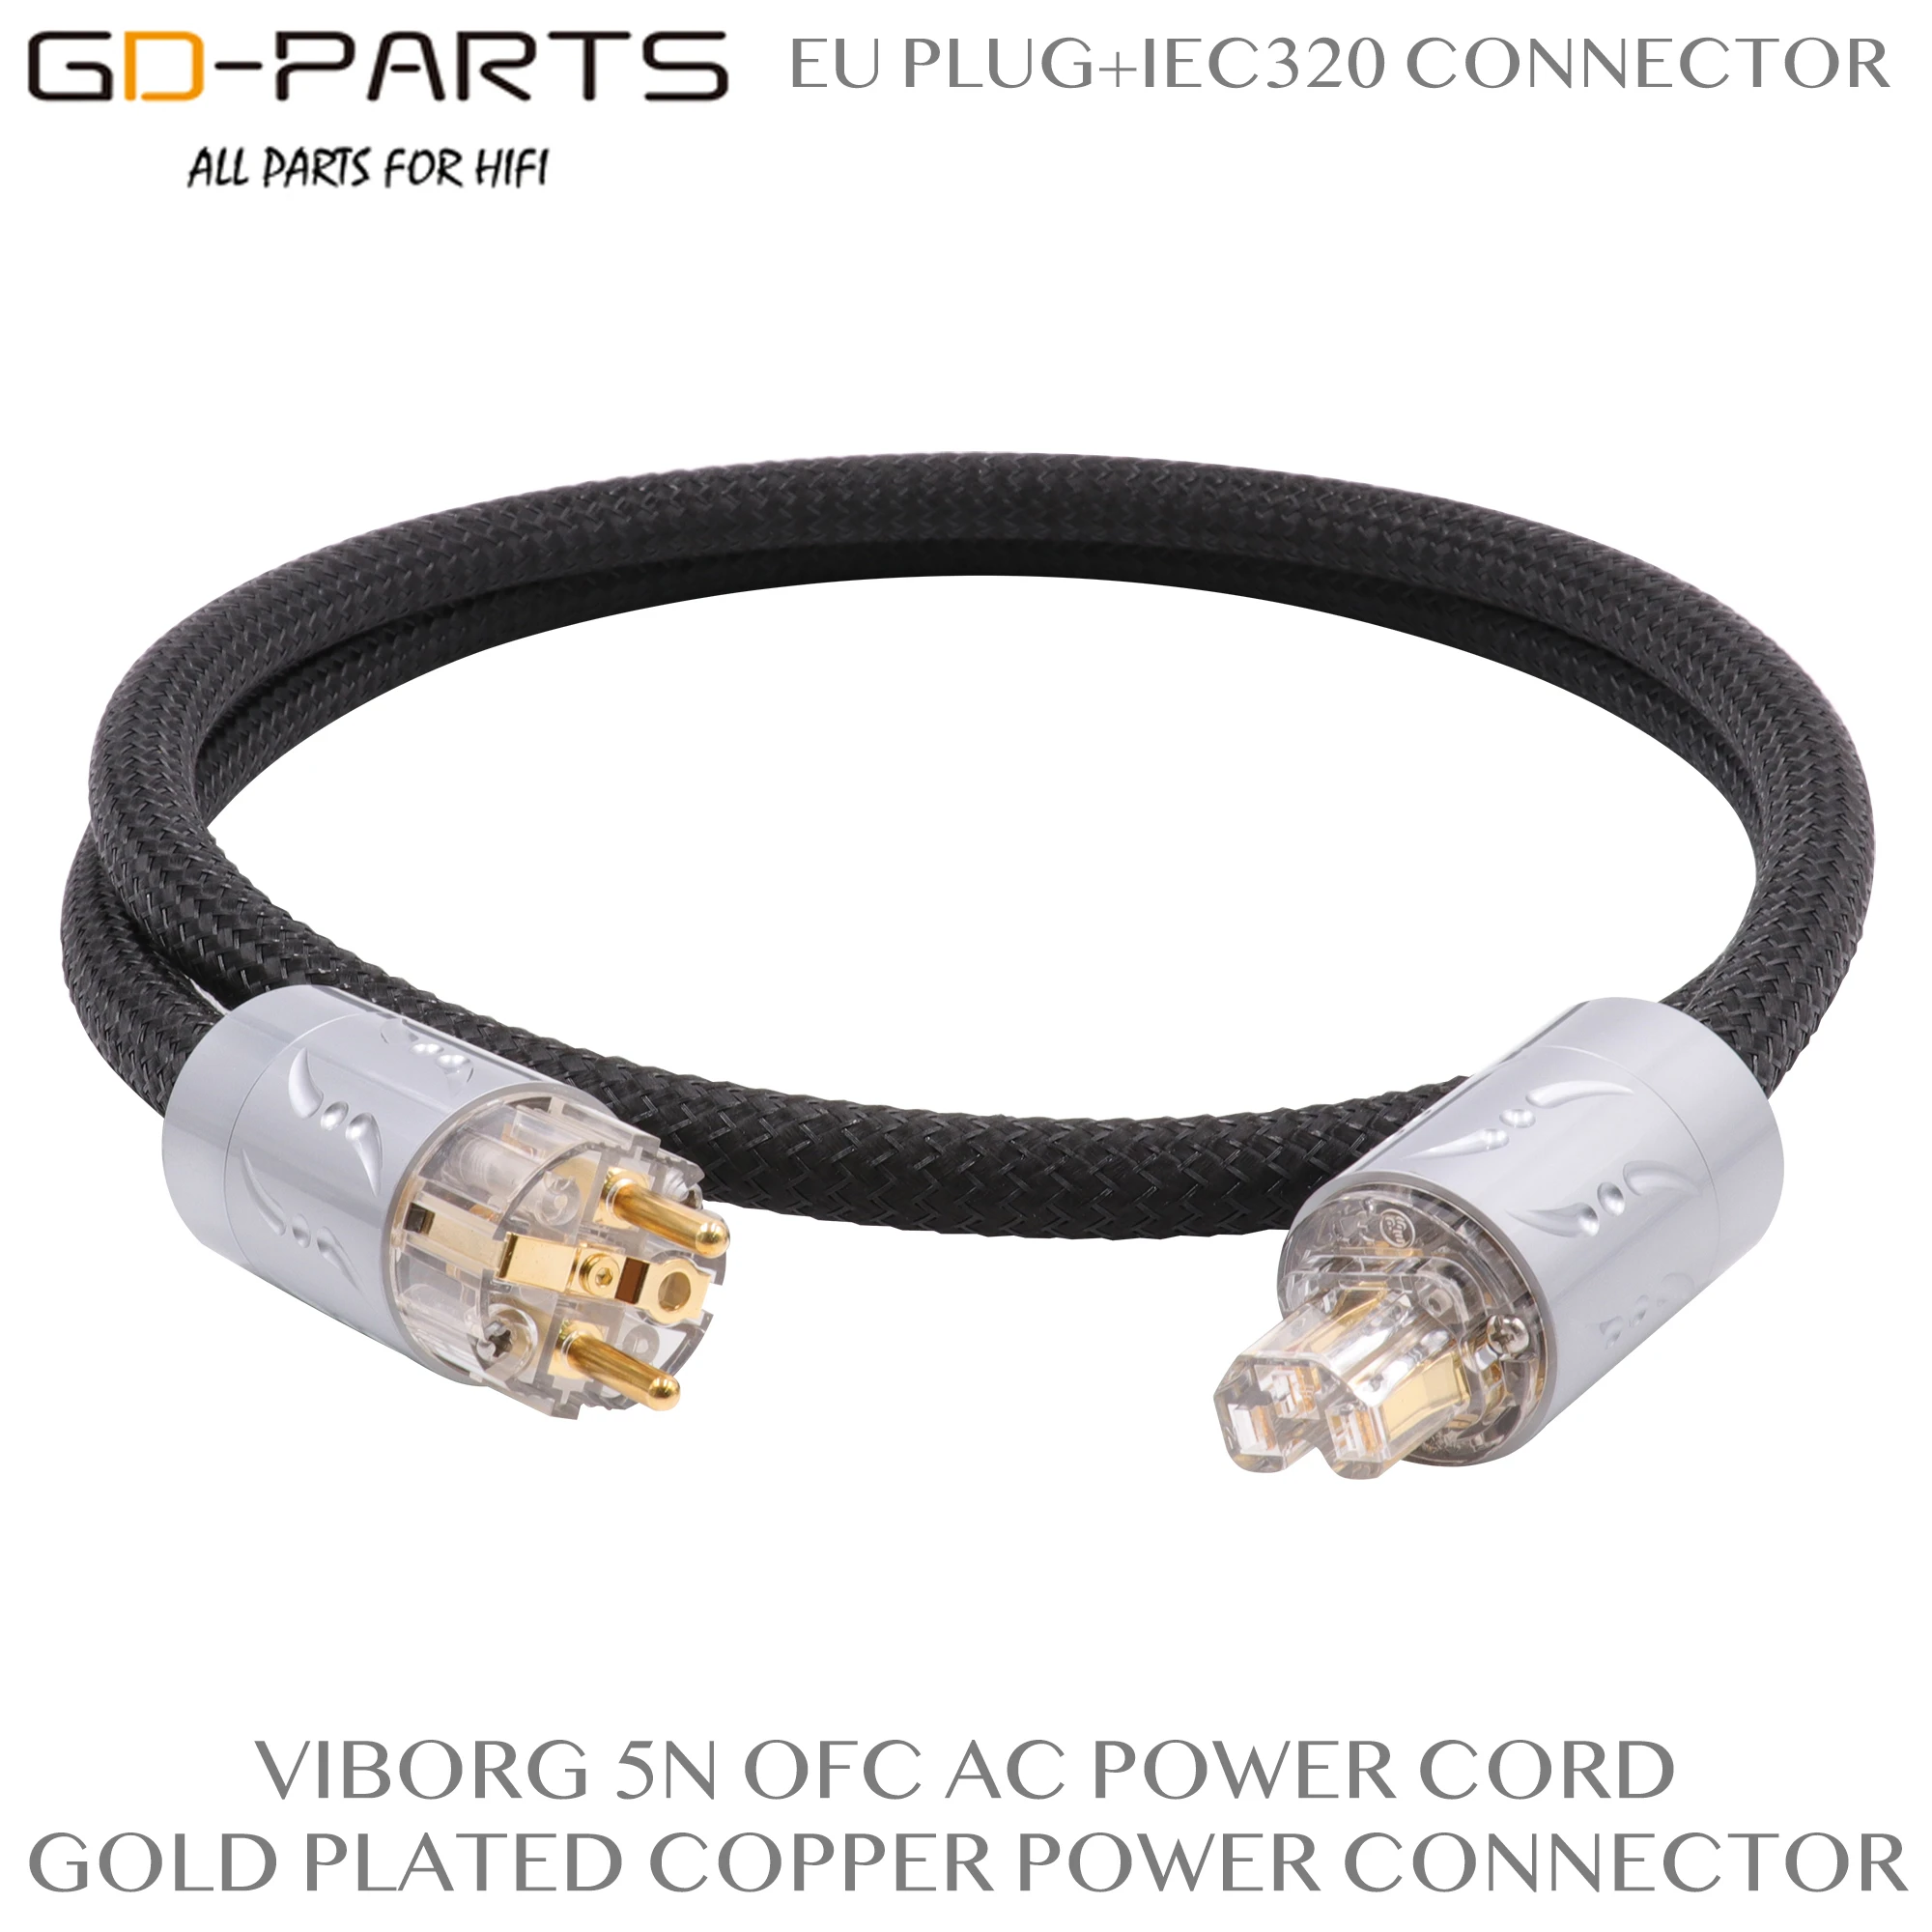 Viborg EU IEC320 AC Power Cable Cord 5N OFC Conductor Litz Structure 24K  Gold Plated Copper Power Plug Connector Hifi Audio DIY|Extension Socket| -  AliExpress